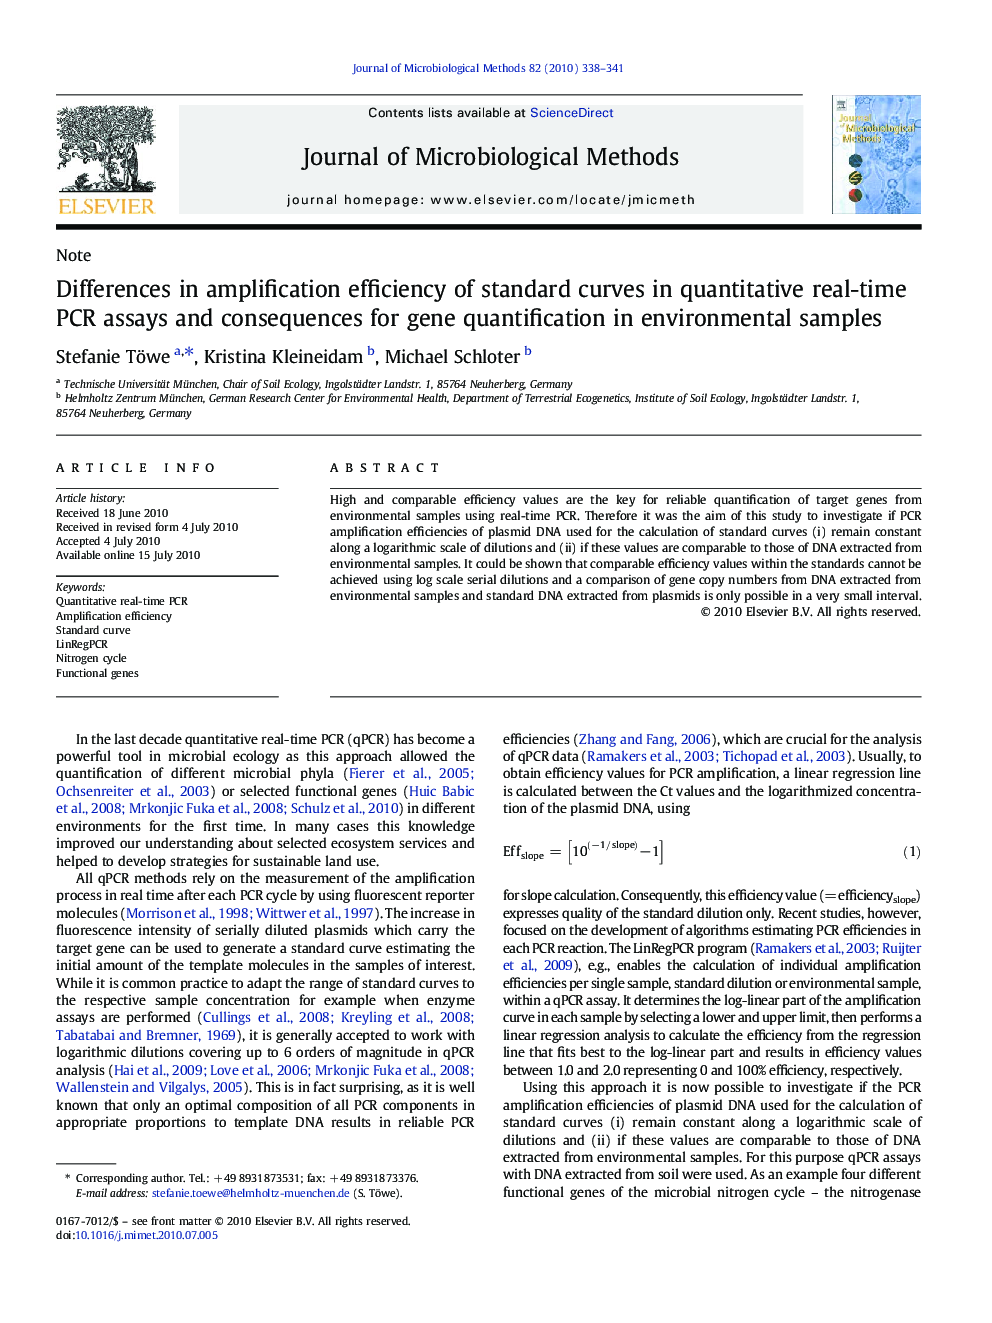 Differences in amplification efficiency of standard curves in quantitative real-time PCR assays and consequences for gene quantification in environmental samples